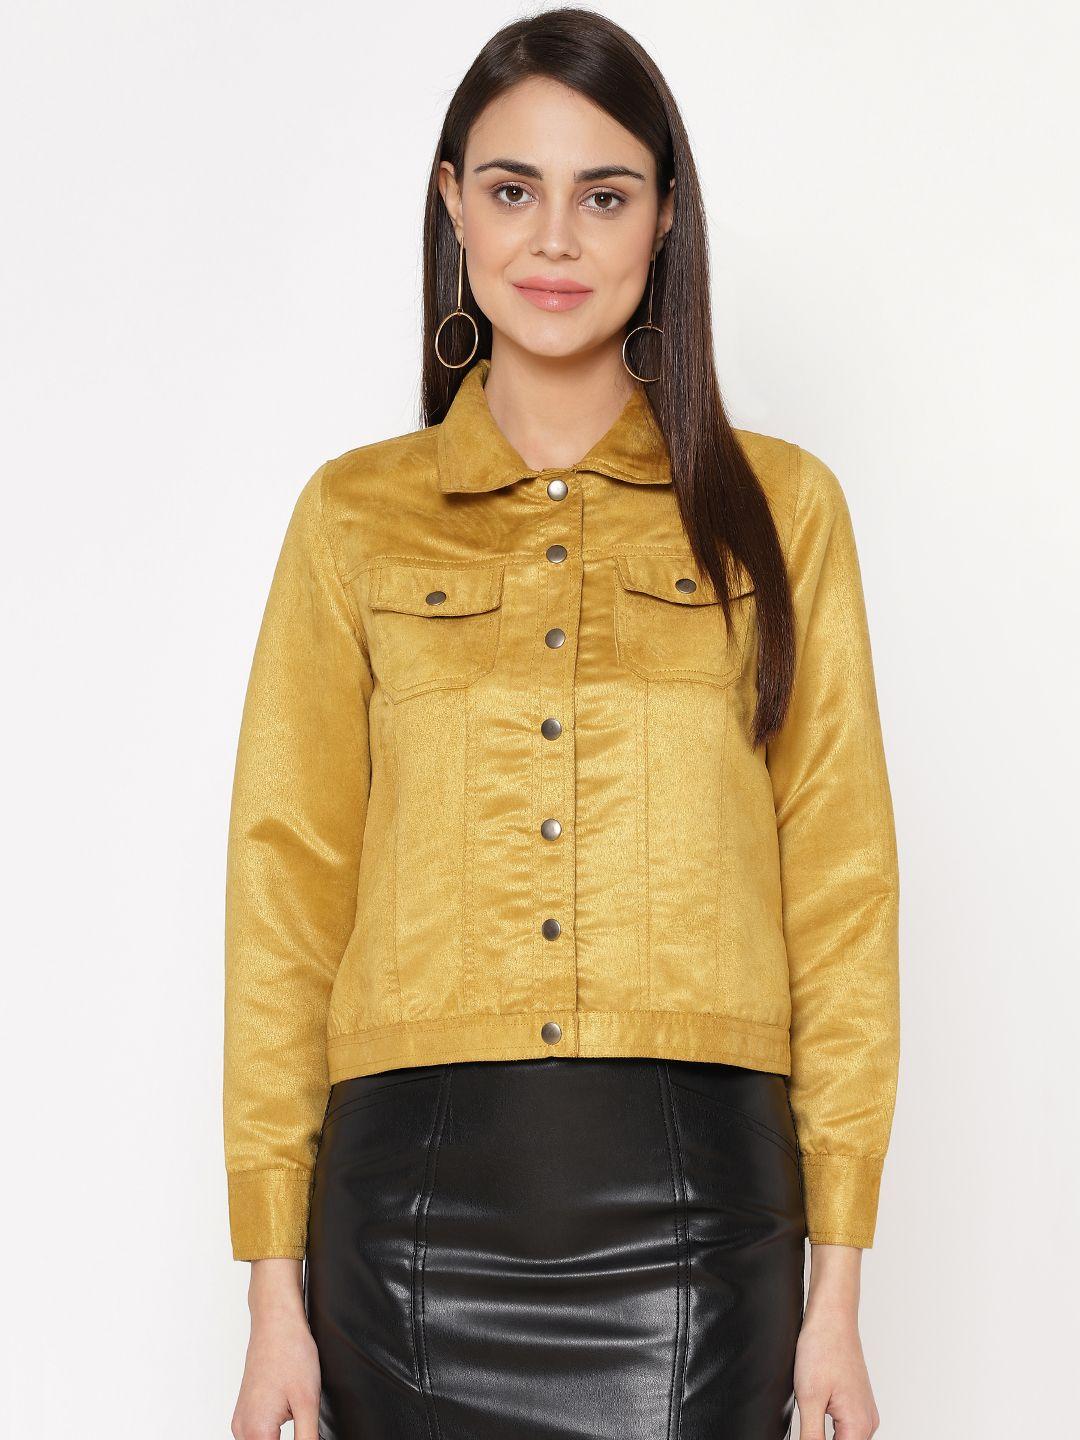 carlton london women mustard yellow solid tailored jacket with suede finish